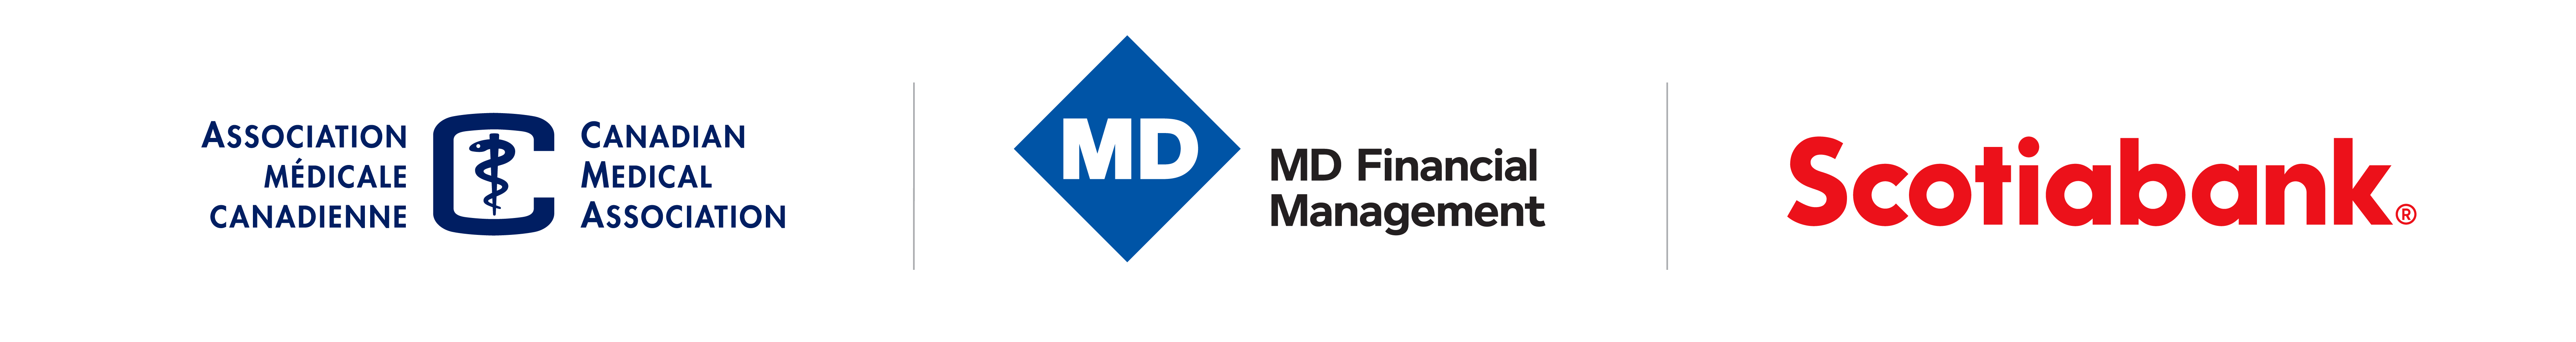 Canadian Medical Association, MD Financial Management and Scotiabank logos displayed together horizontally